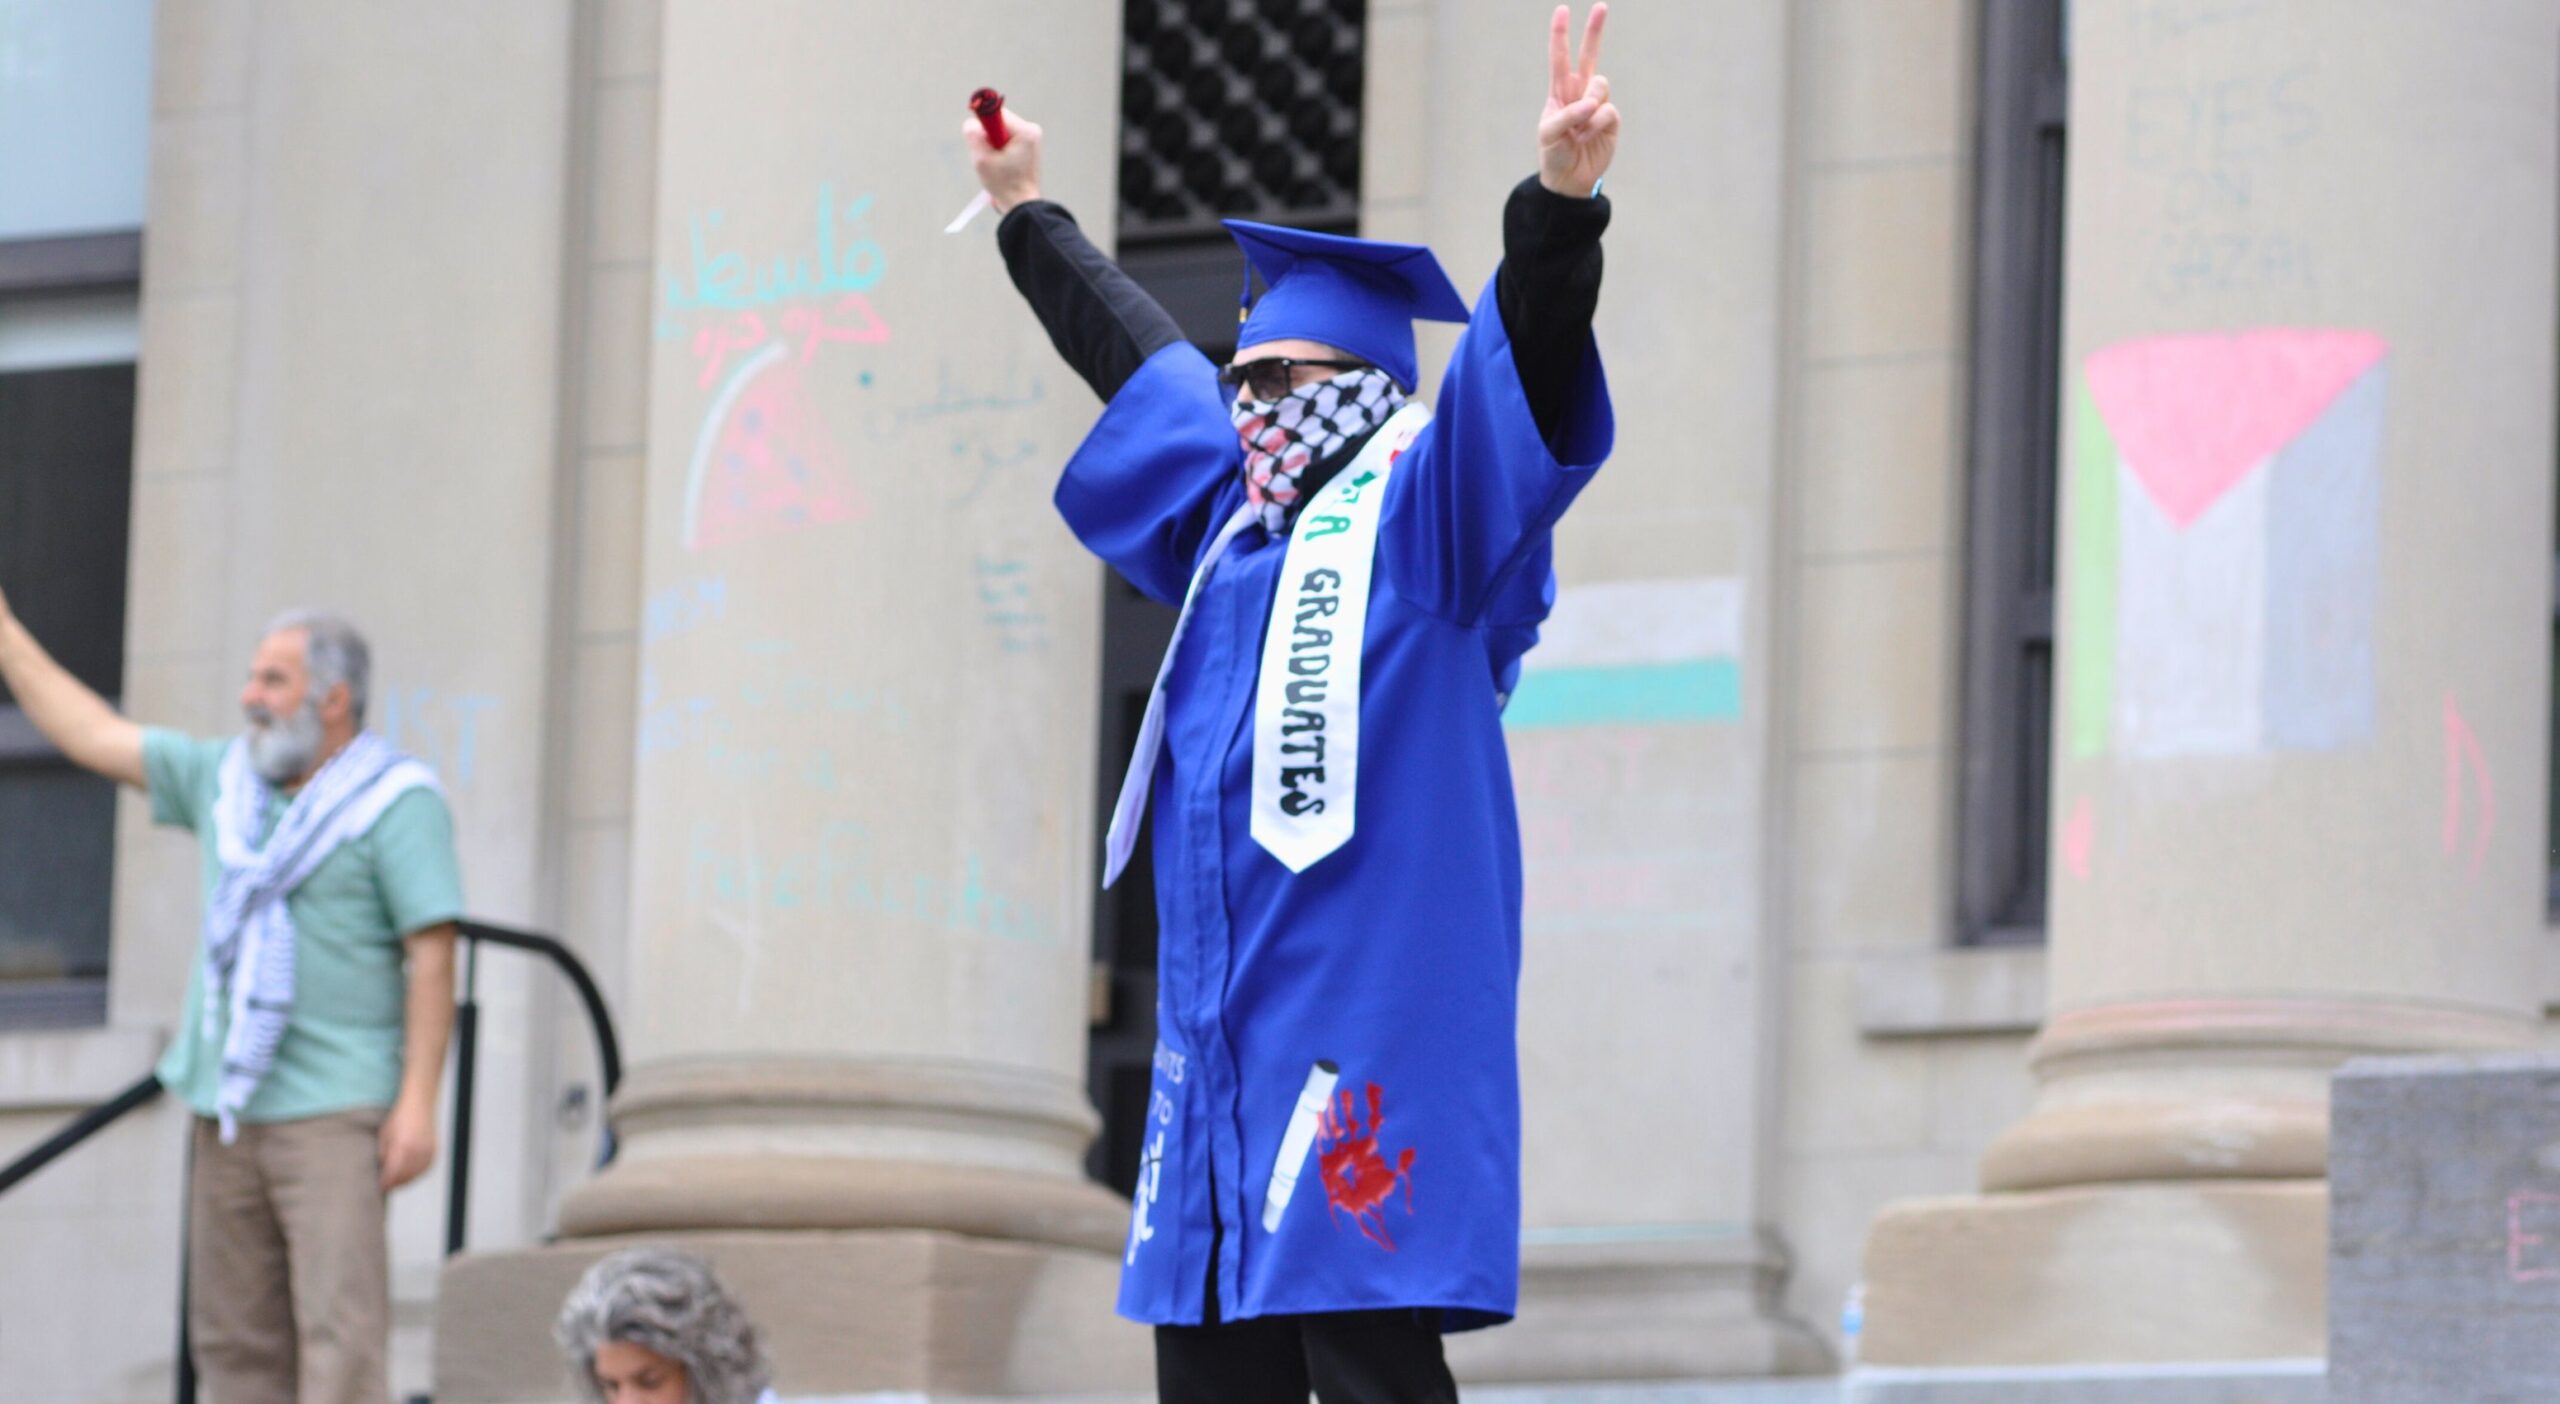 protester dressed in blue graduation gown